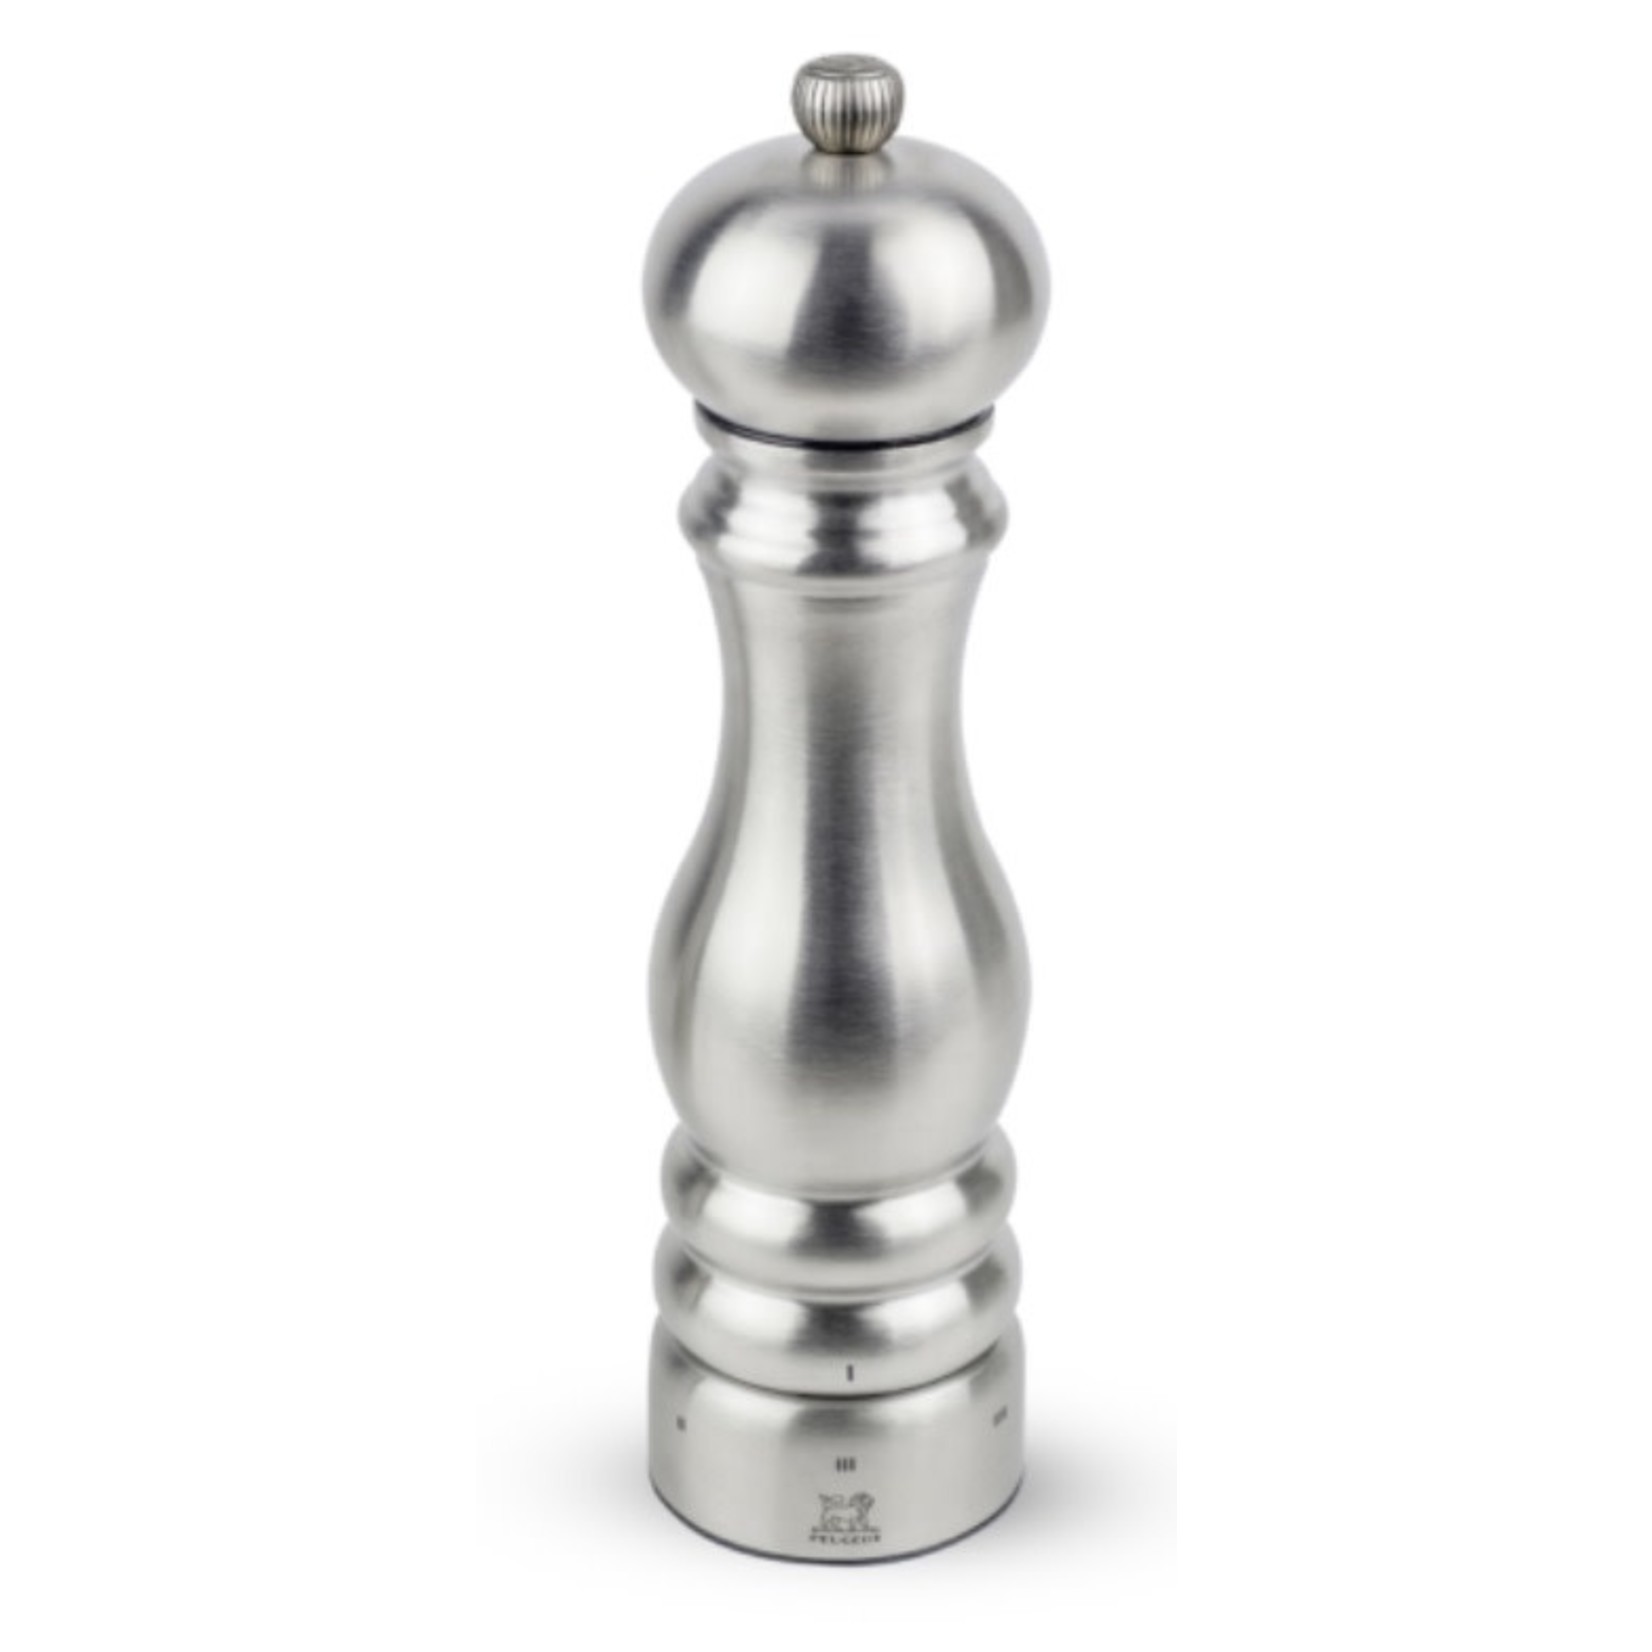 PEUGEOT PEUGEOT Paris CHEF USelect Pepper Mill 22cm - Stainless